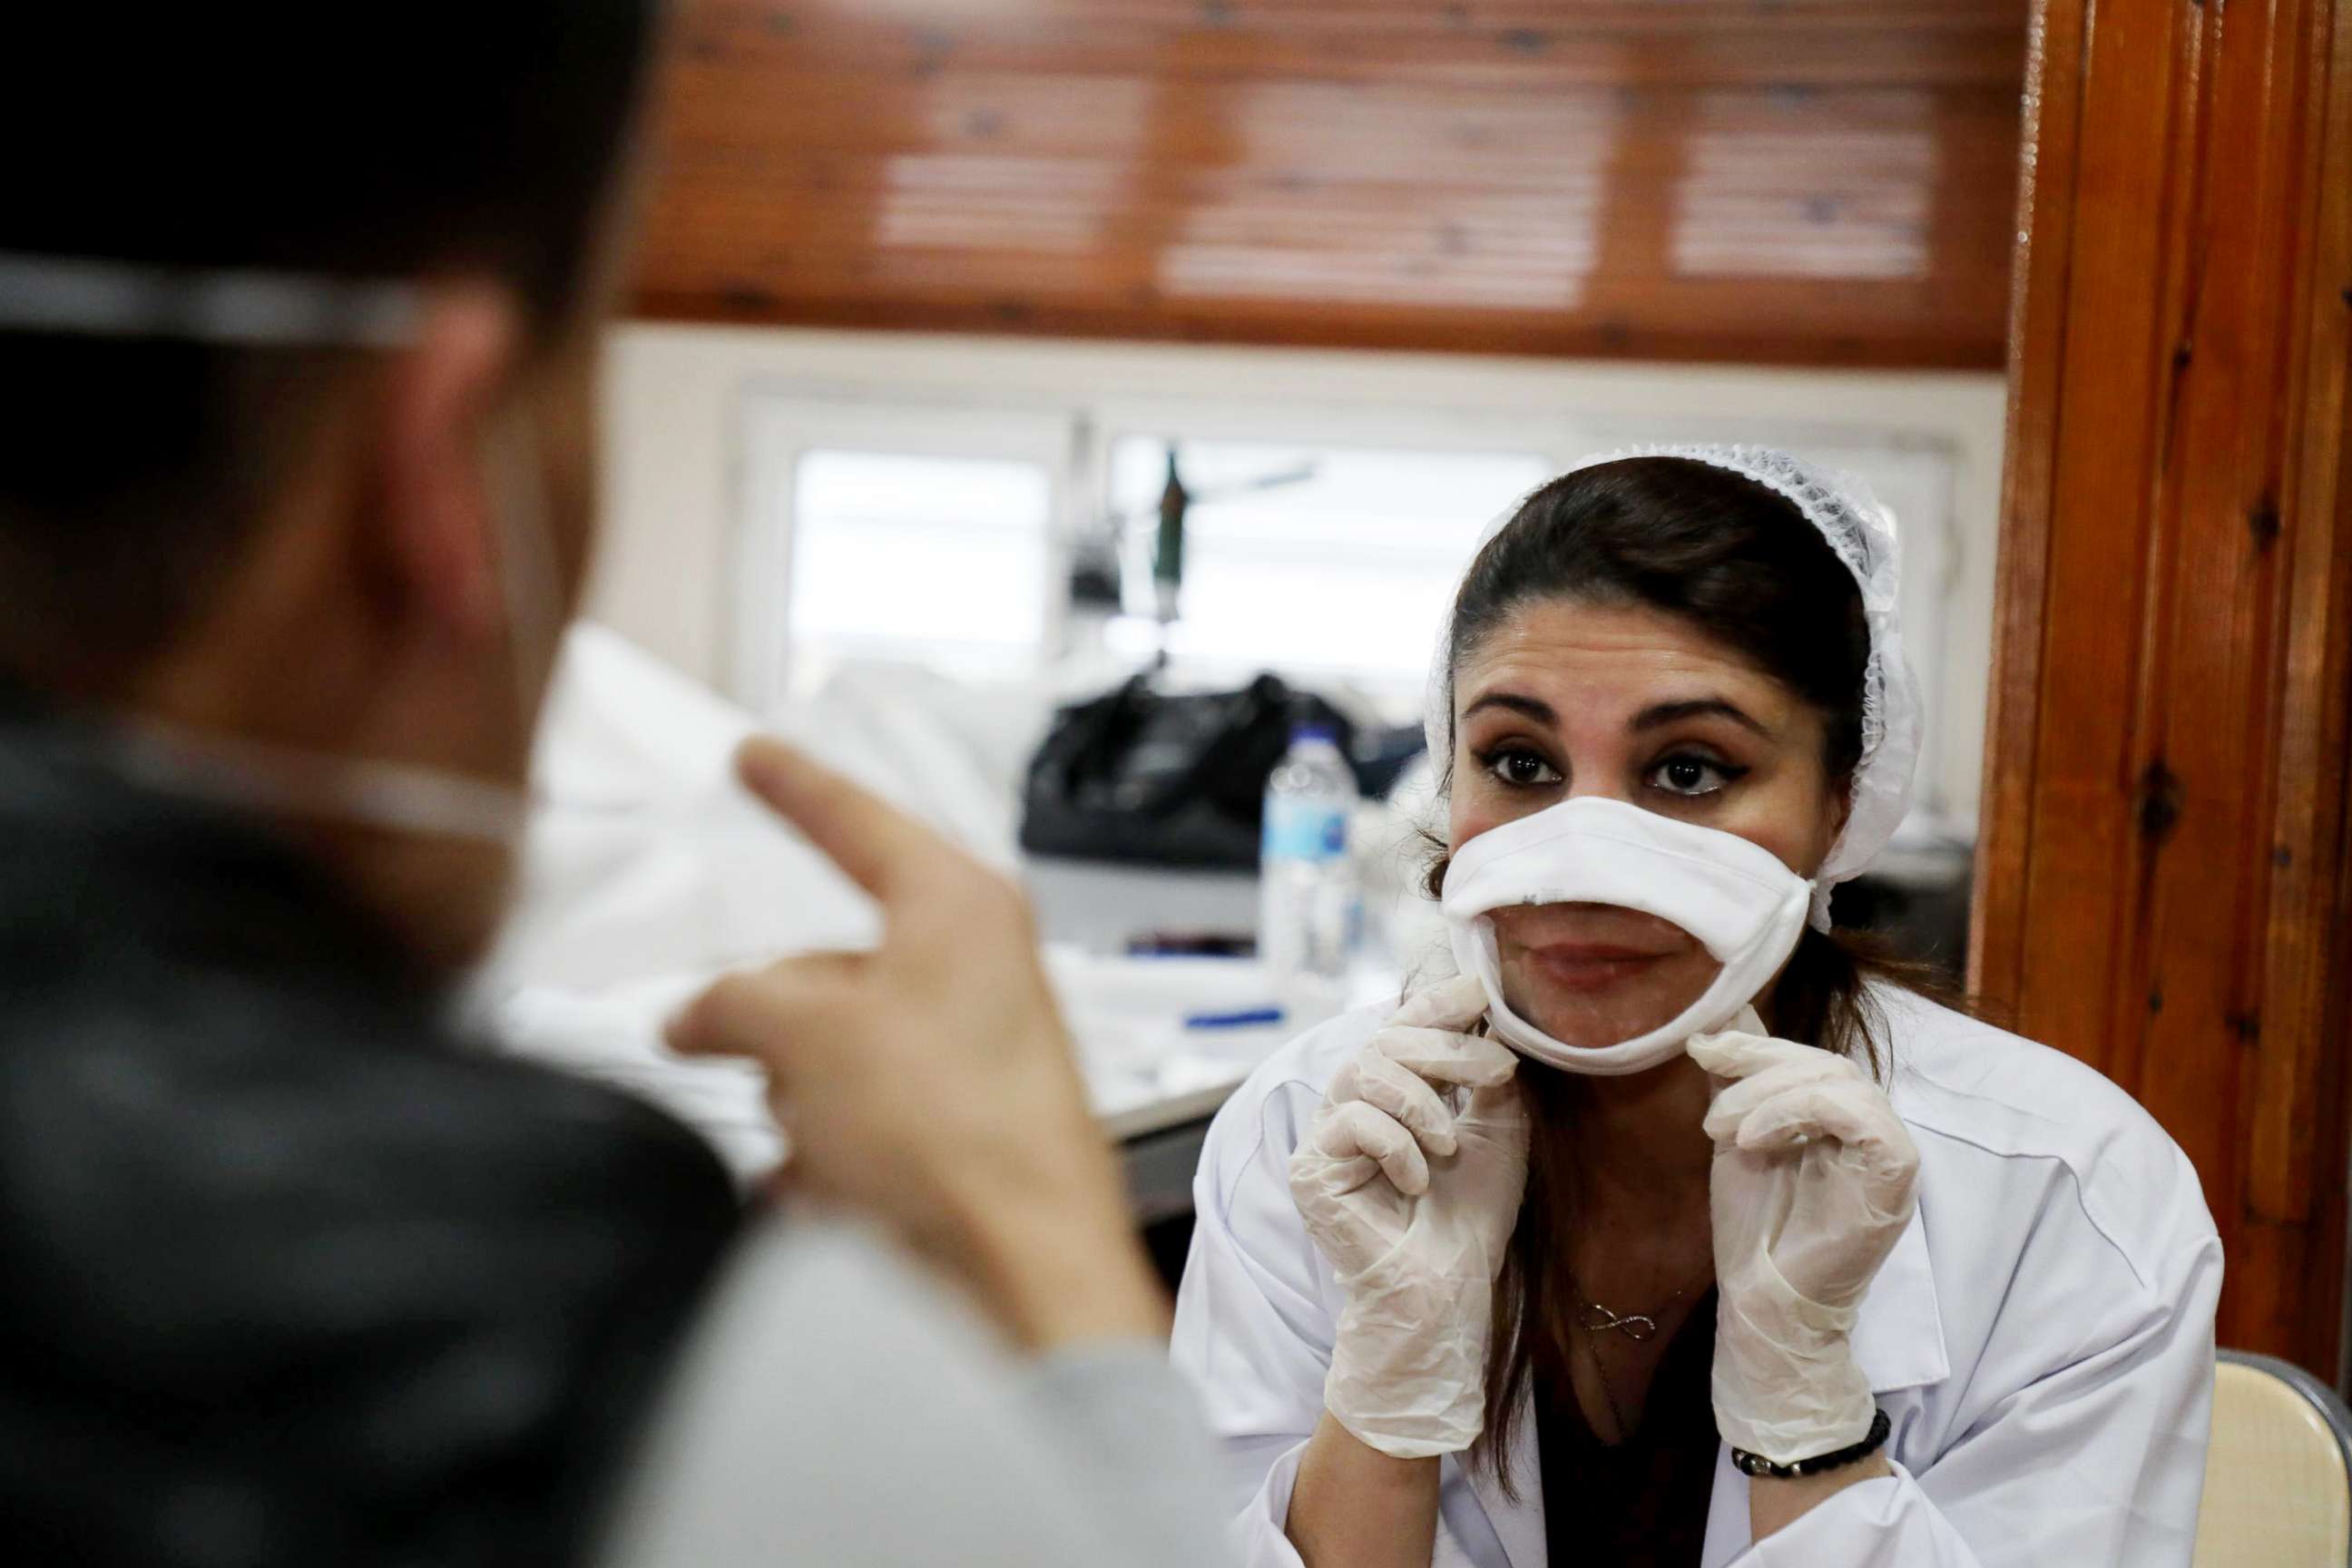 PHOTO: A medical worker wears a face mask with a transparent window to allow for lip reading while speaking with others while at work in Istanbul, May 27, 2020.